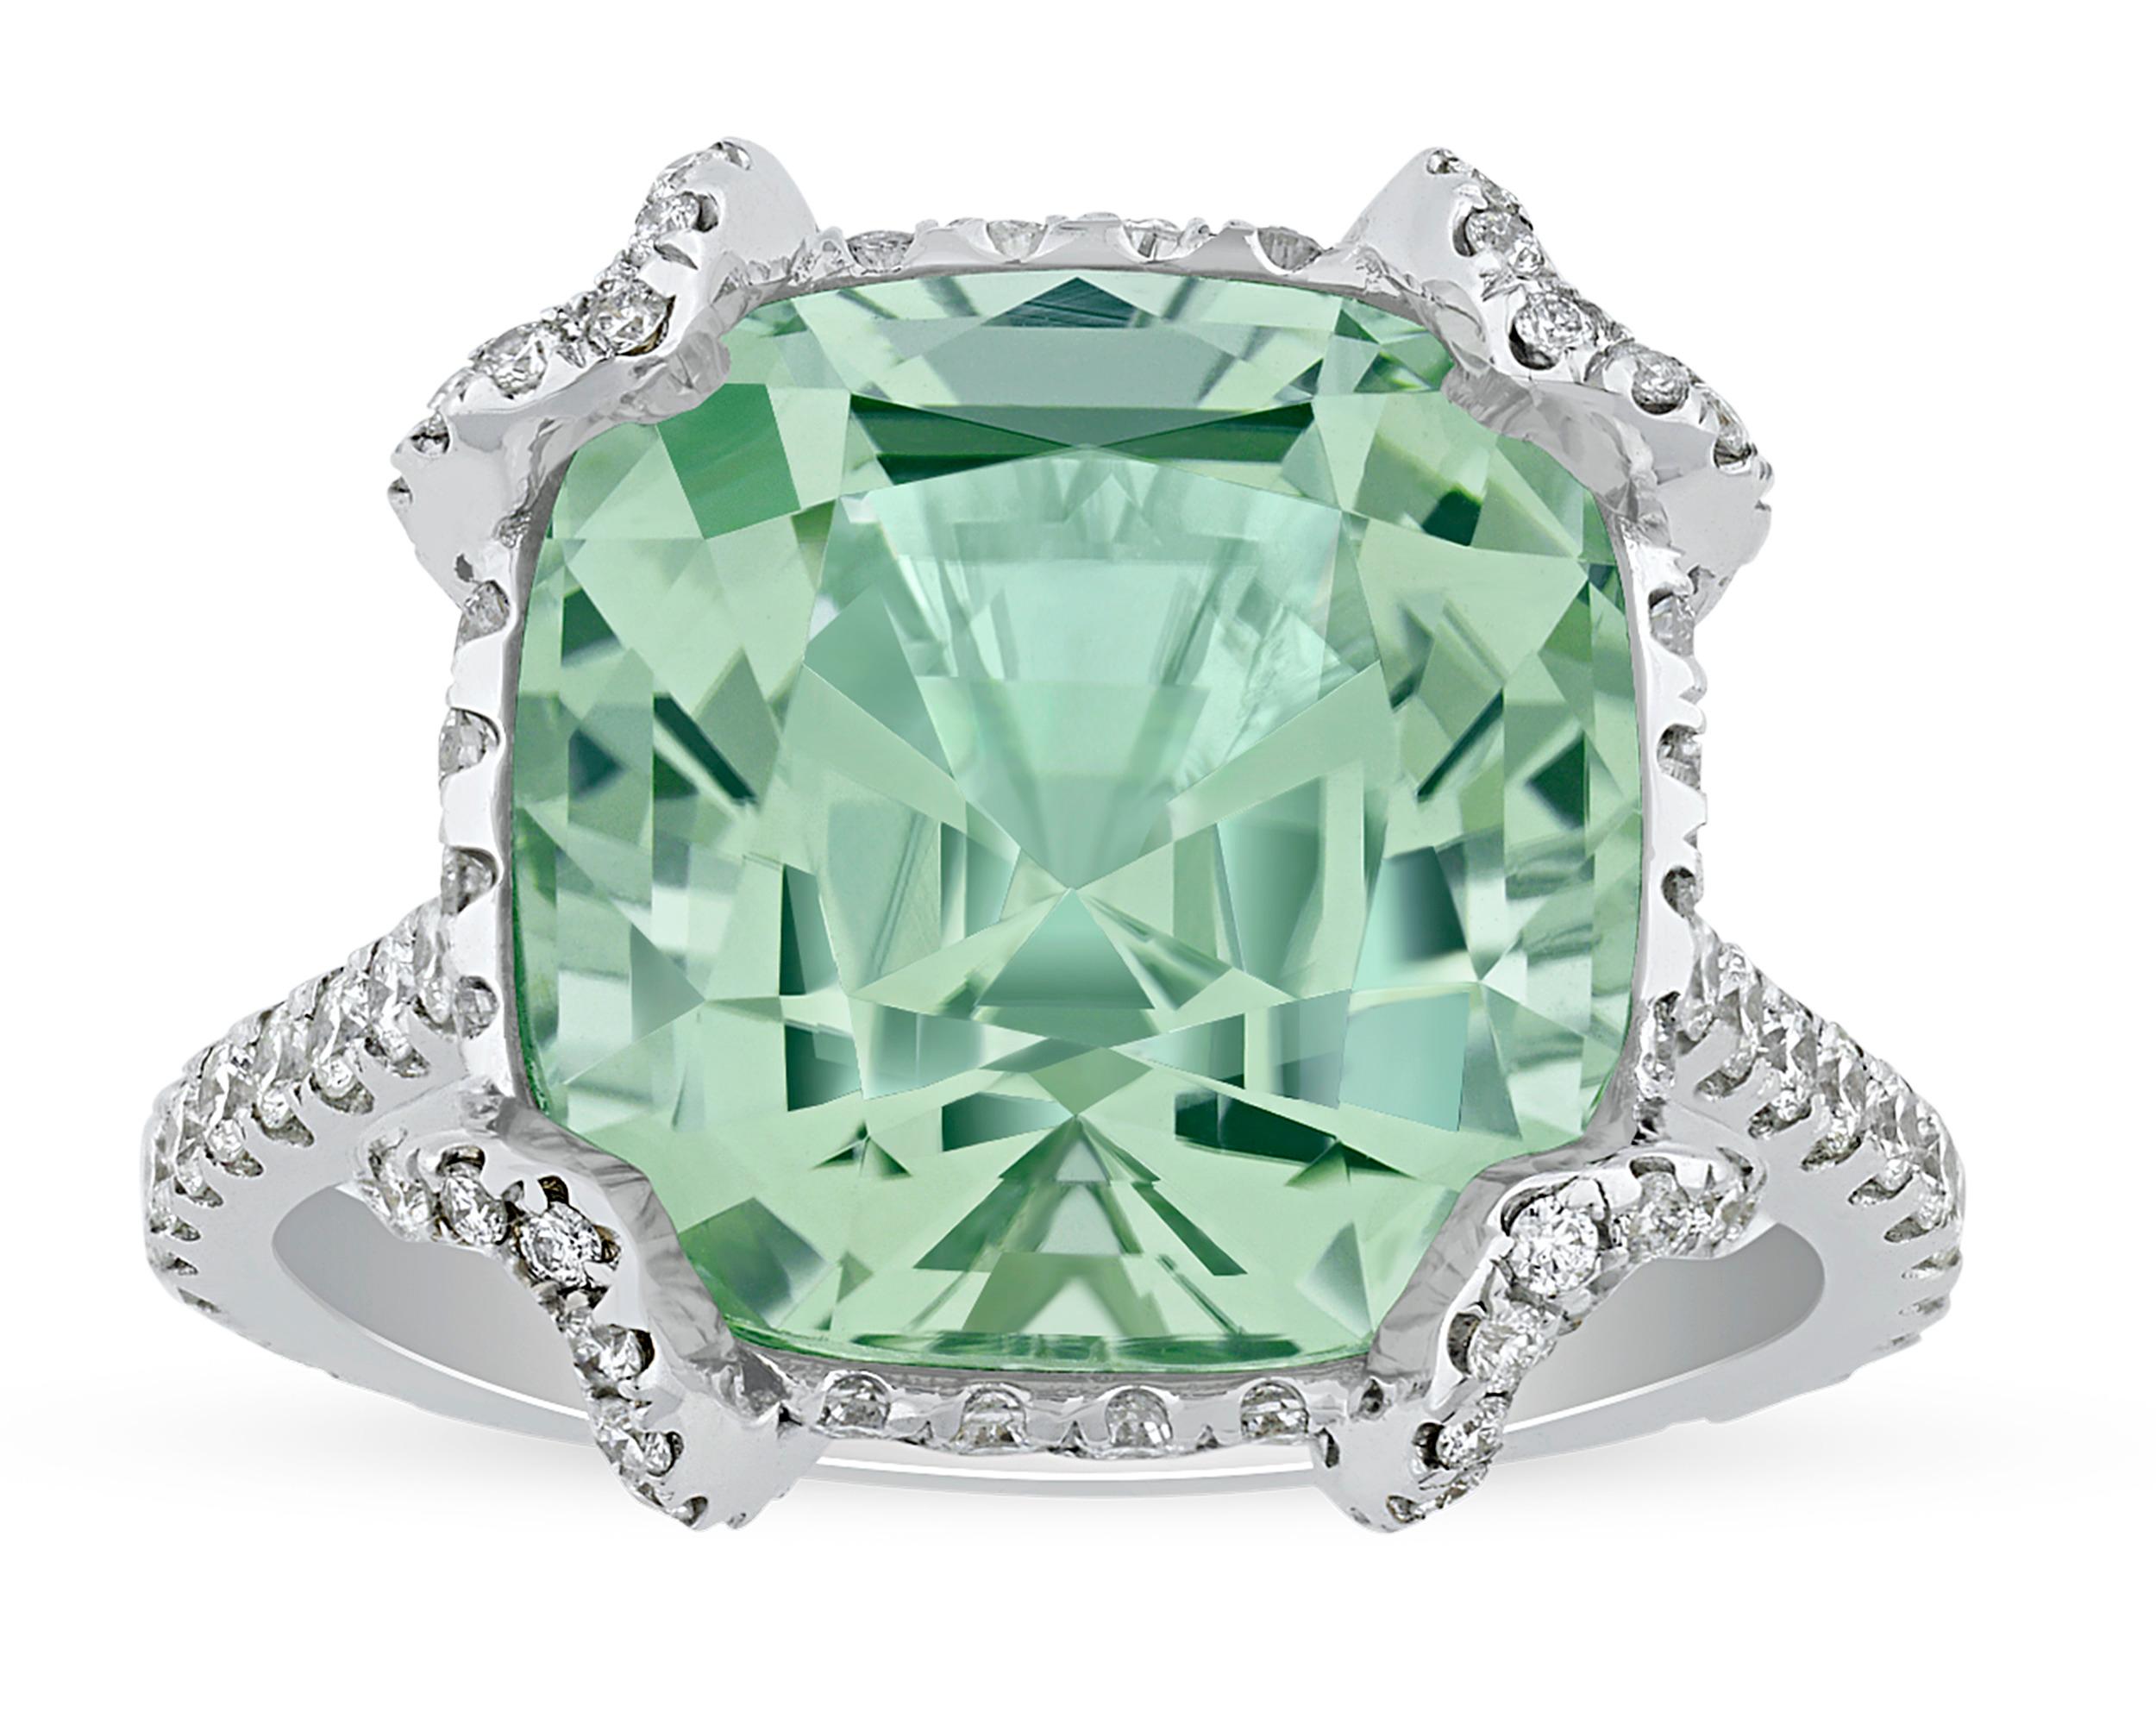 The refreshing and crisp green hue of mint tourmaline in this ring brings to mind the coming of spring. Weighing 8.36 carats, the square octagon-cut gemstone resides in an 18K white gold setting amongst a halo of white diamonds.